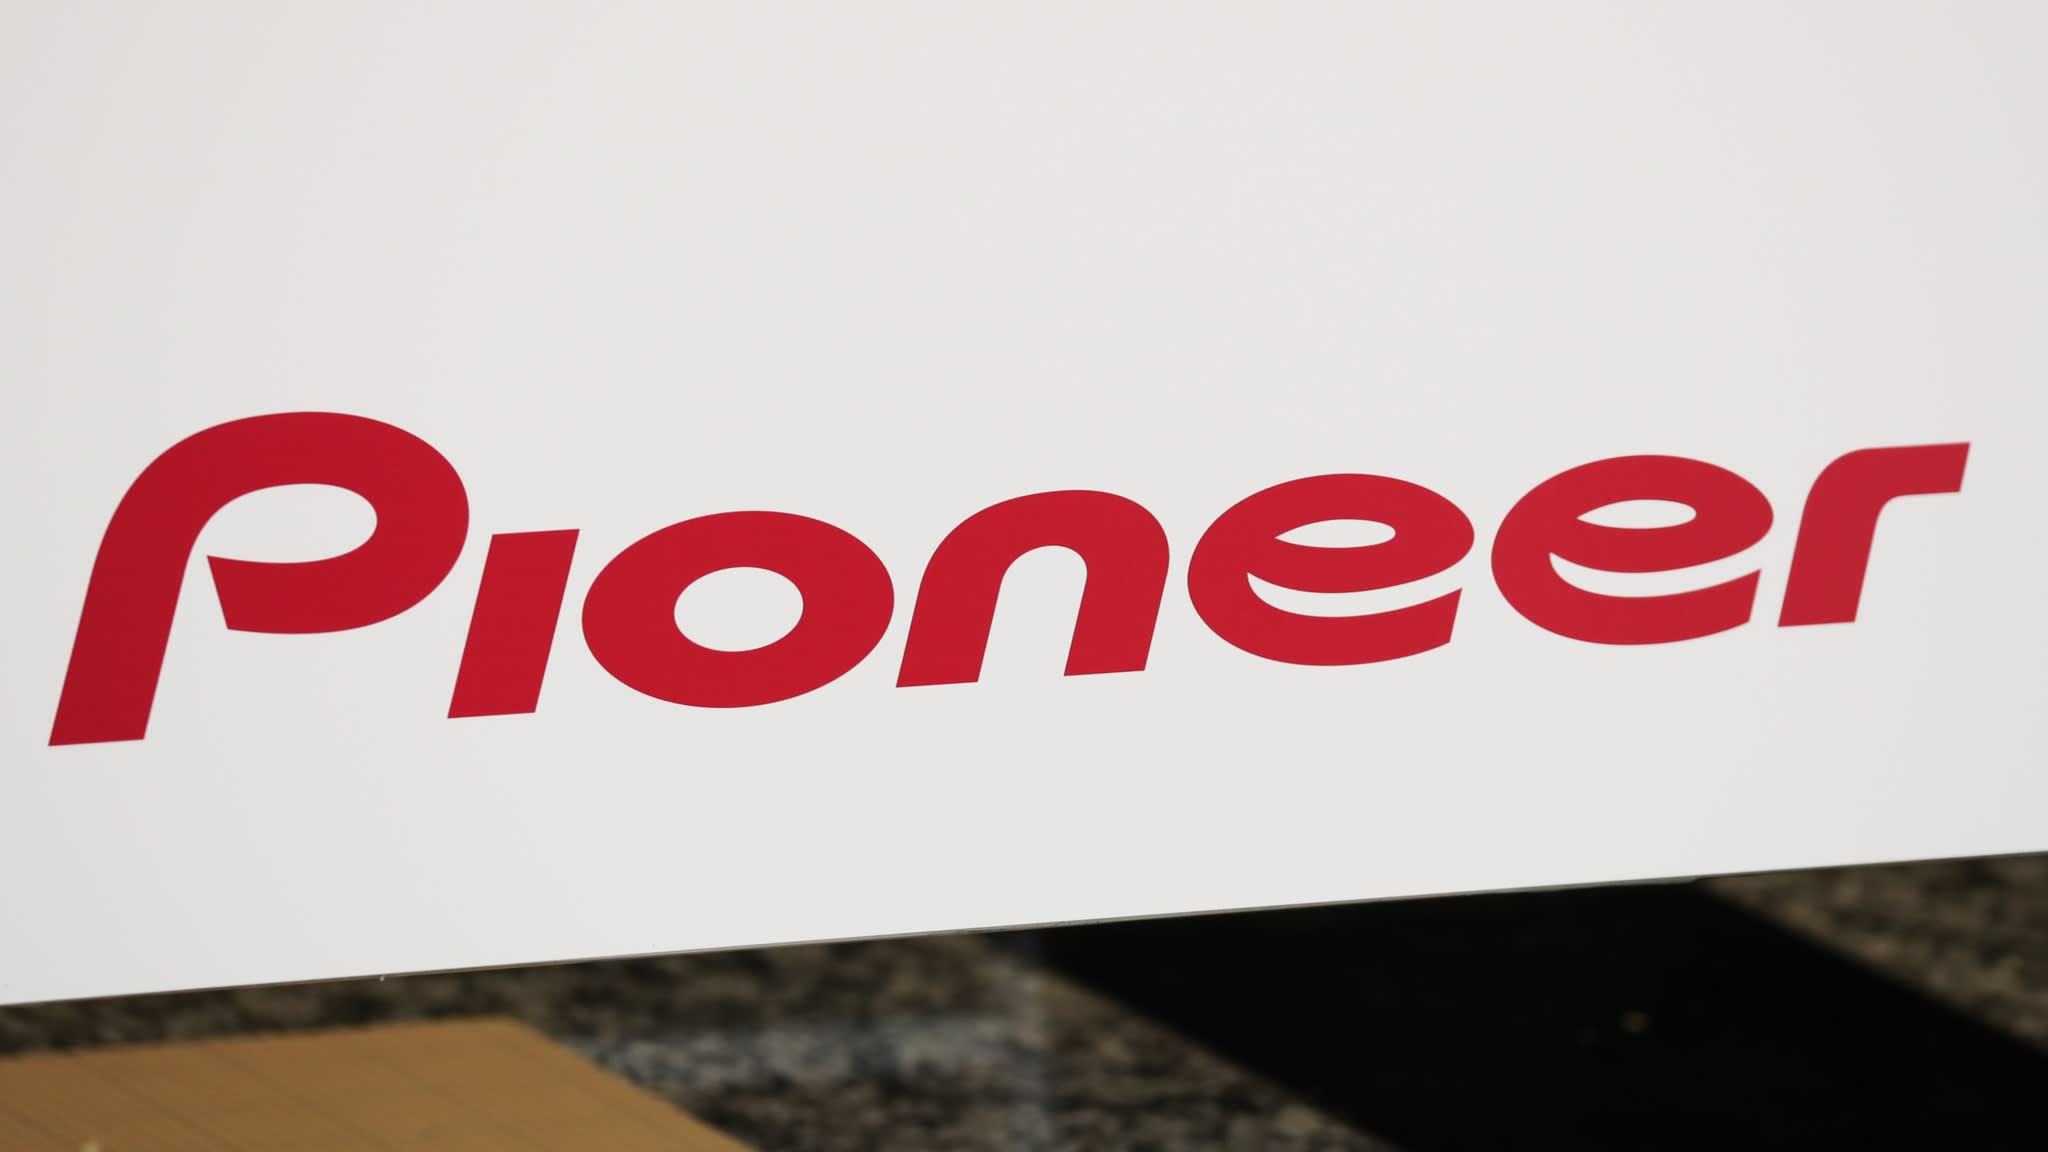 Red Pioneer Logo - Pioneer Faces Bumpy Road Despite Bailout From Asia Based Fund